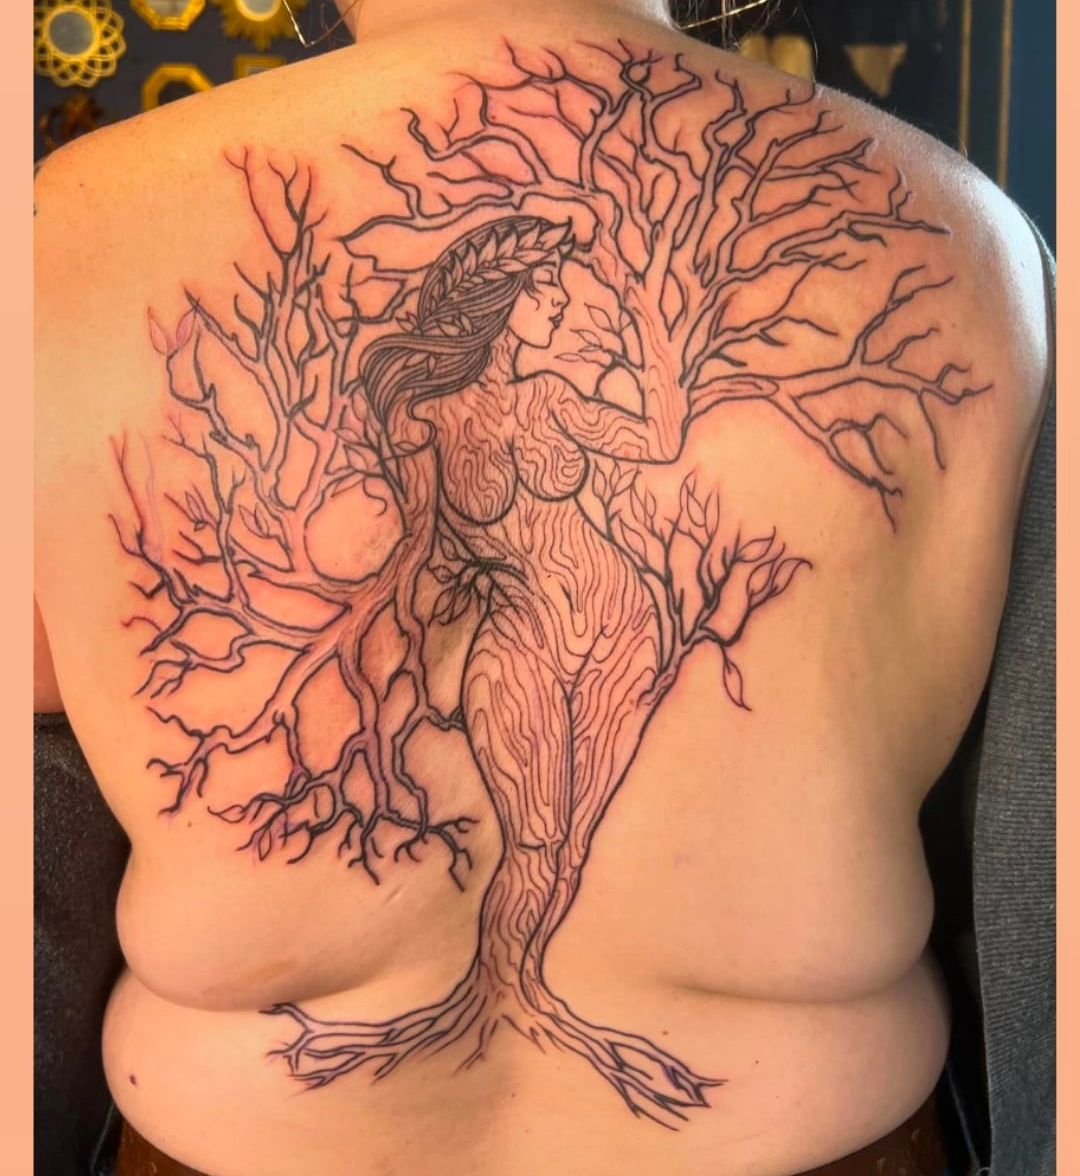 Fresh linework for Nature Goddess back piece by Austin.
Check out more of his work and contact directly for booking.
@austin_rose_ta2 
@austin_rose_ta2 
🌟💗🤖
#robotbabes #robotpiercingtattoo #robotarmy #tattoo #portlandtattoo #professionaltattoo #l